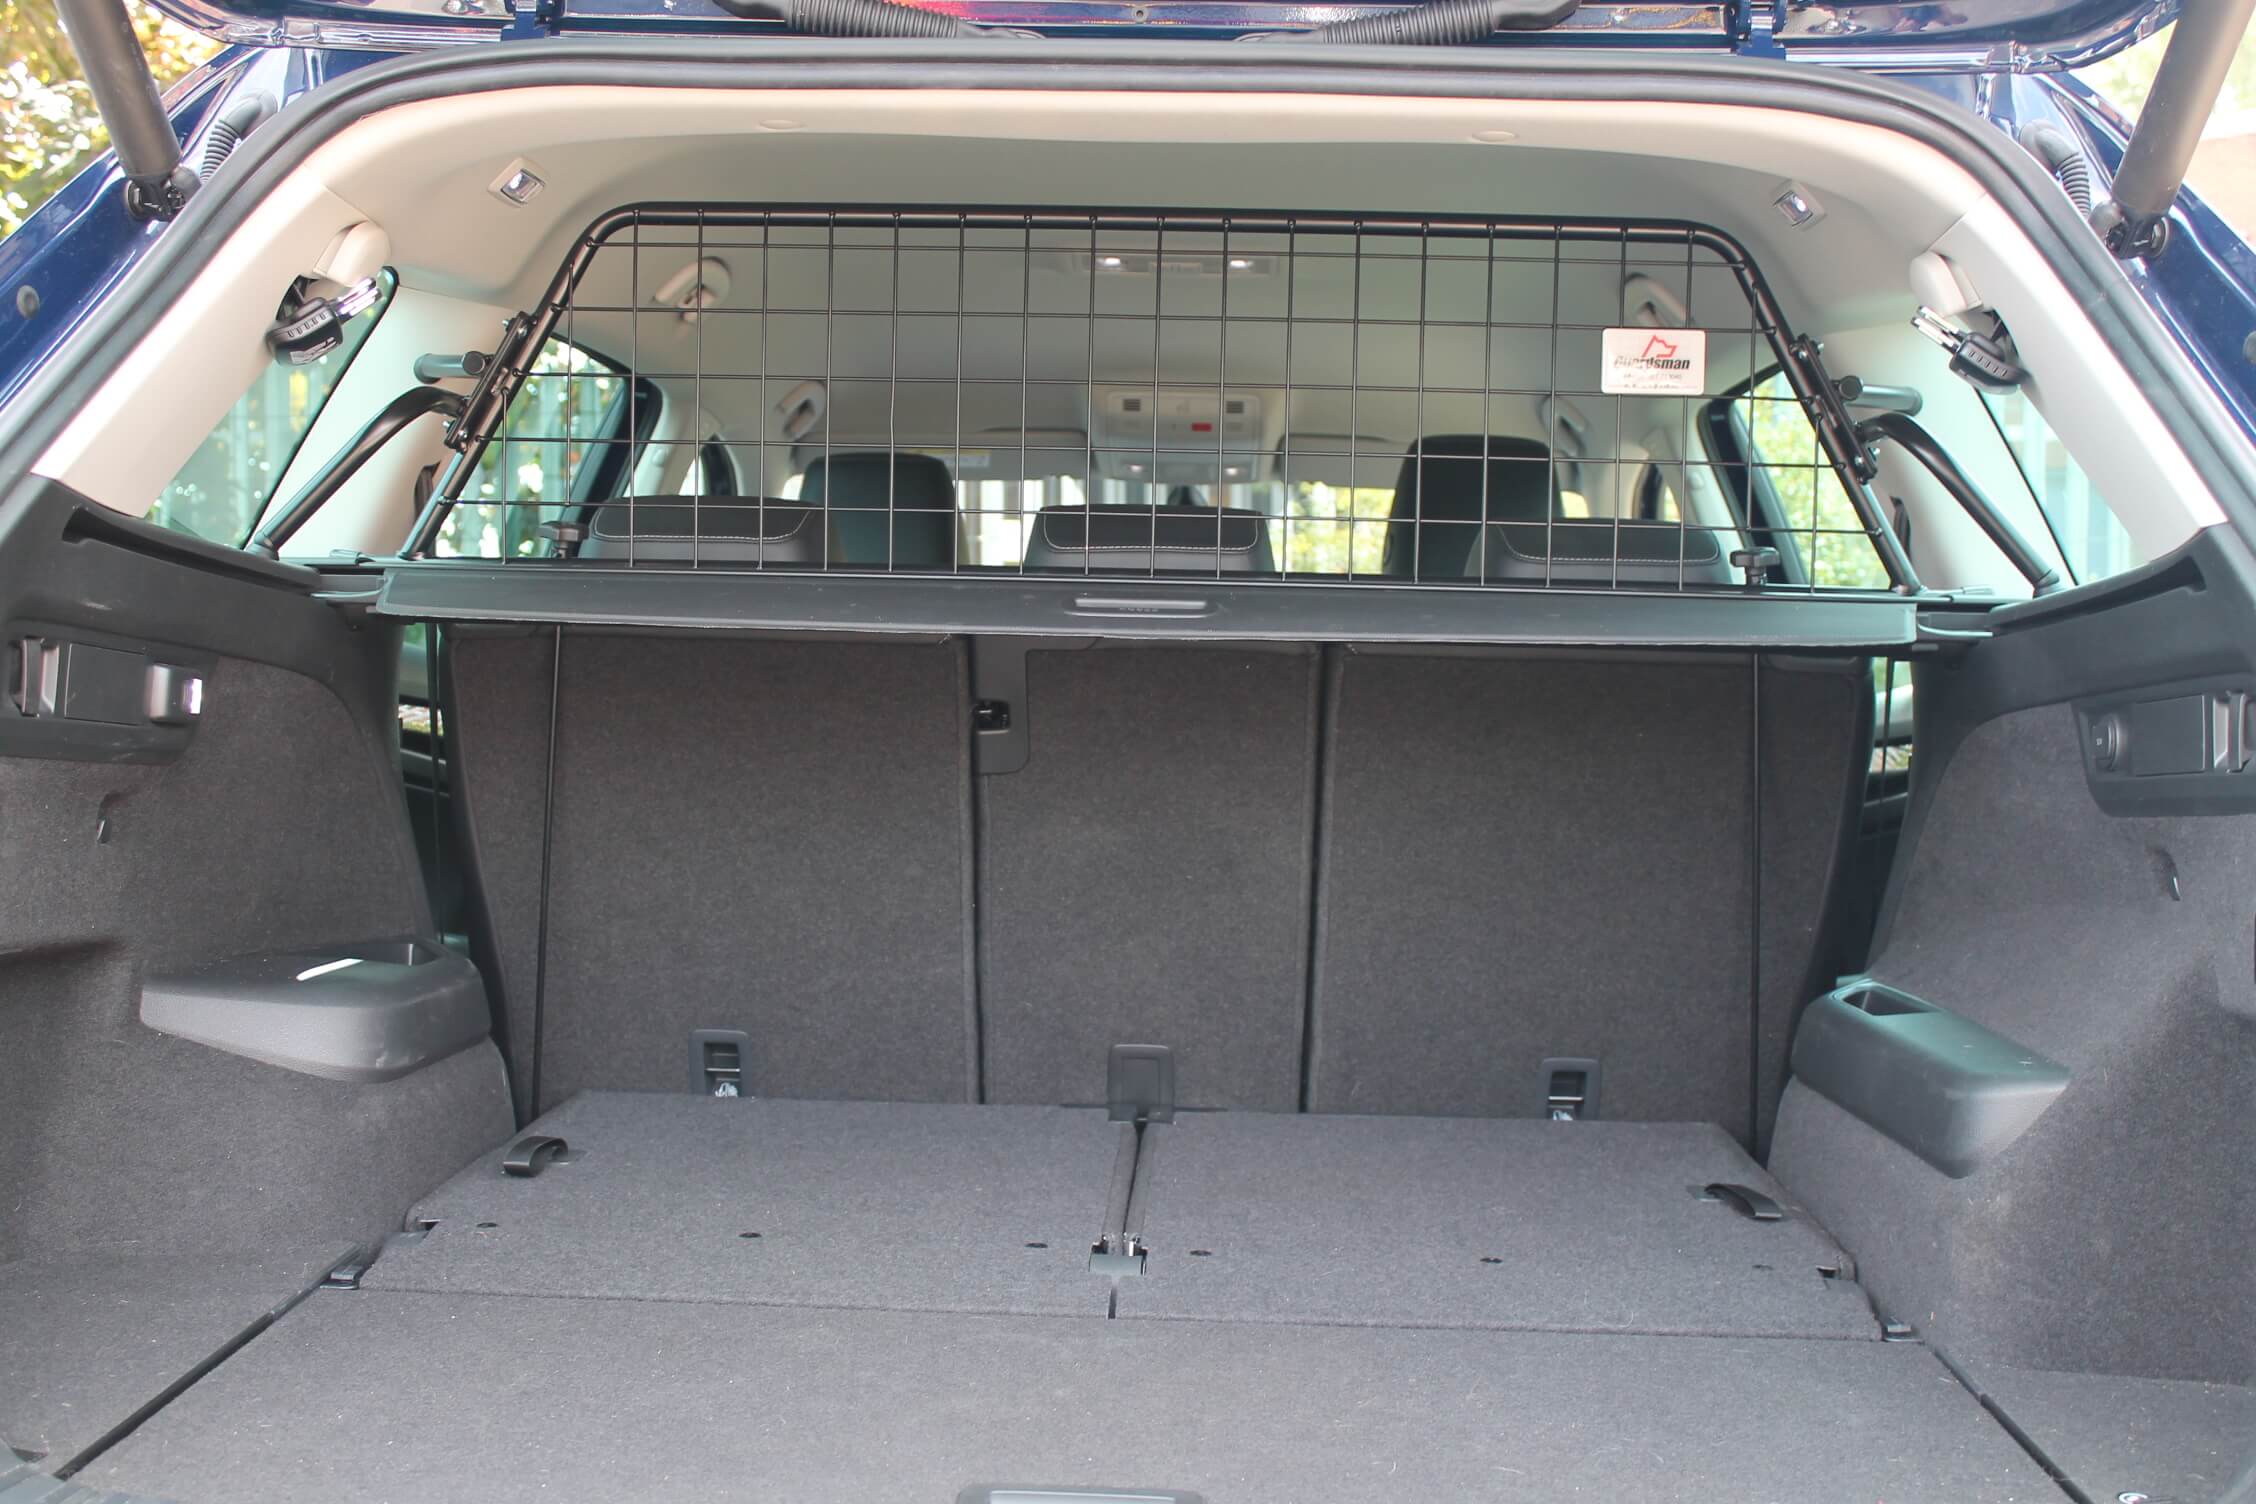 https://www.guardsmandogguards.co.uk/wp-content/uploads/2017/09/skoda-kodiaq-with-boot-cover-fitted.jpg